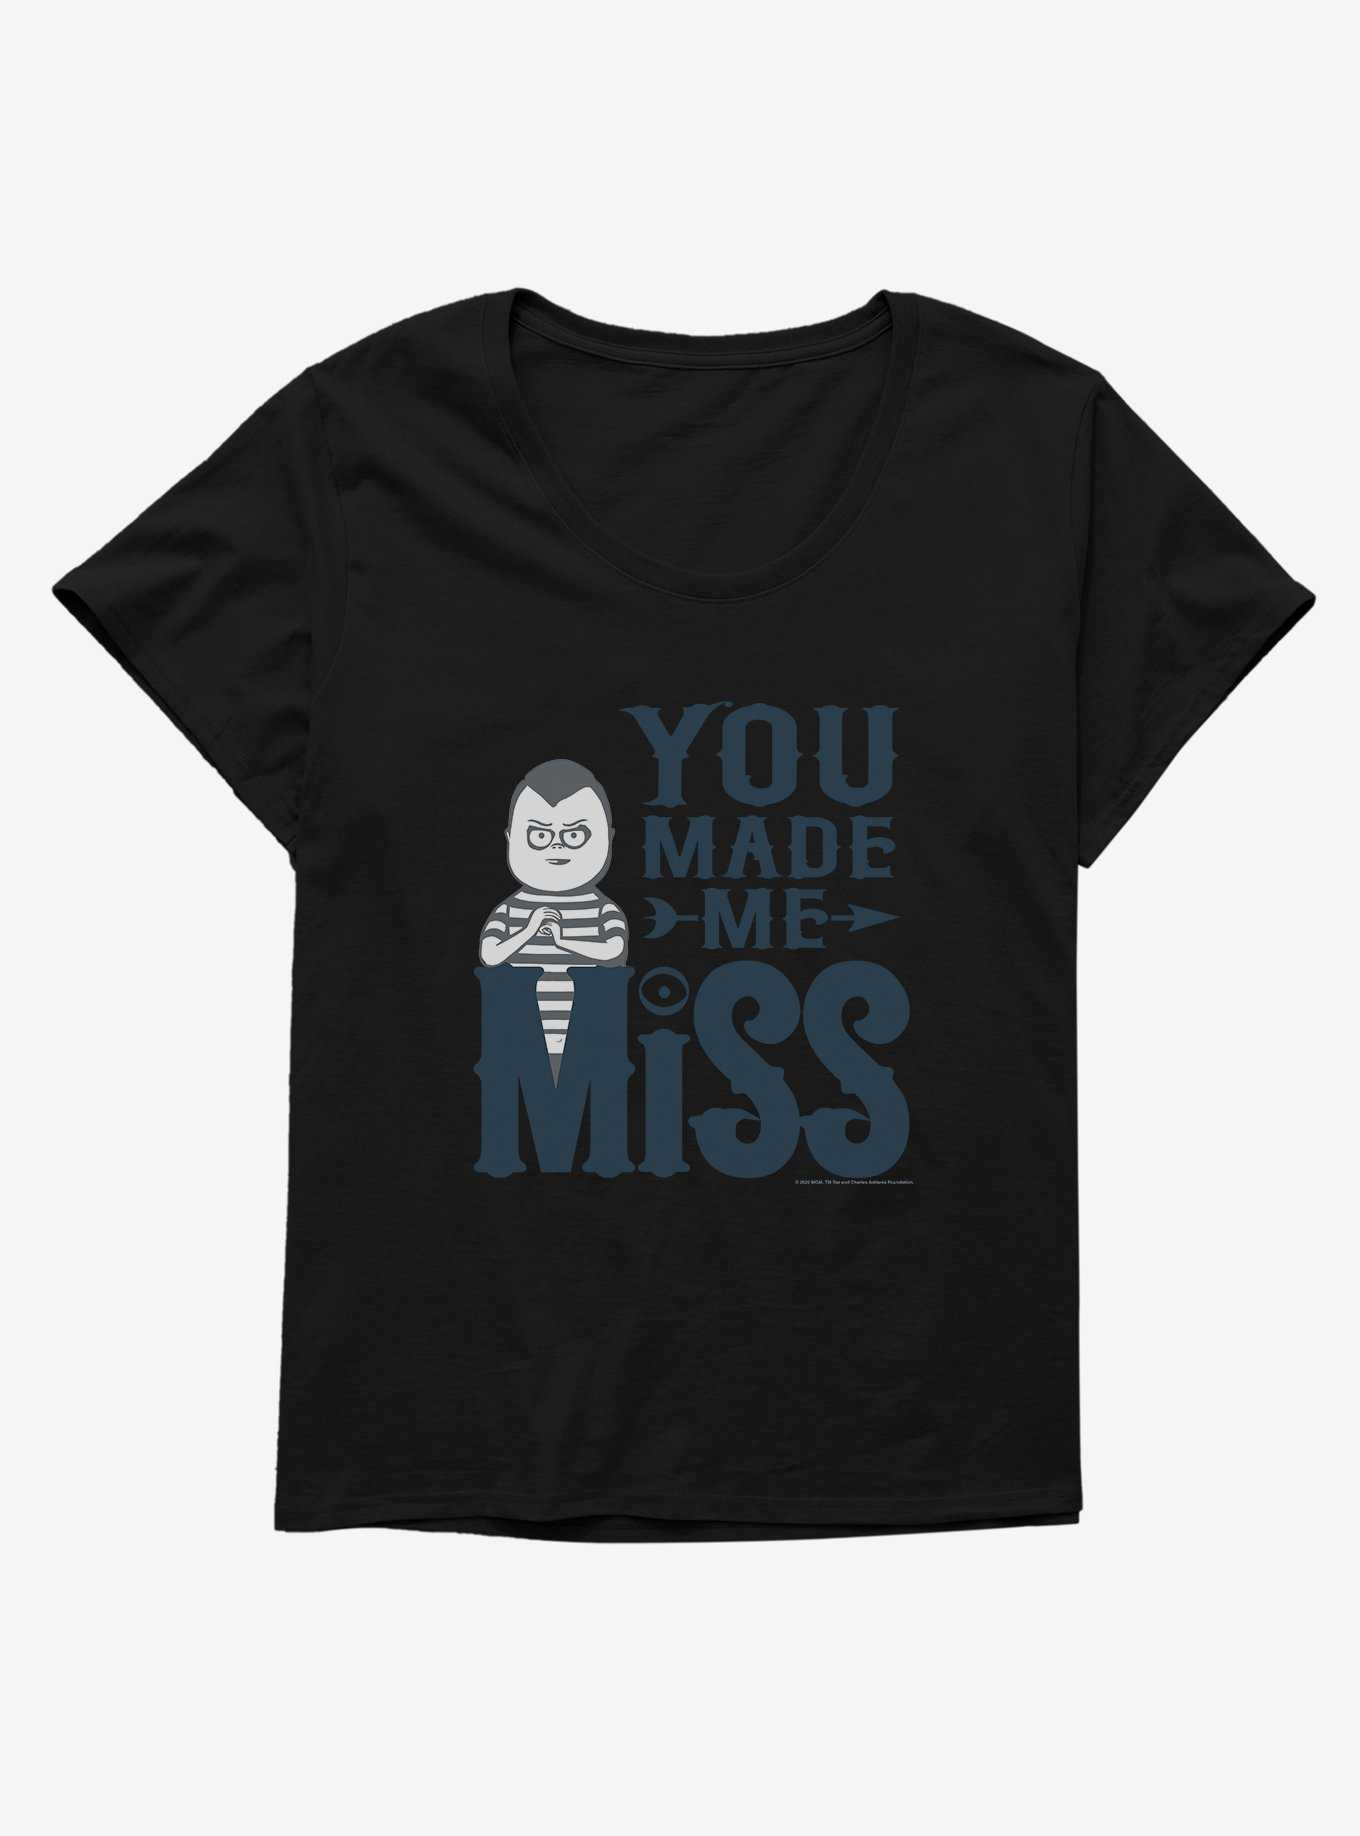 Addams Family You Made Me Miss Girls T-Shirt Plus Size, , hi-res